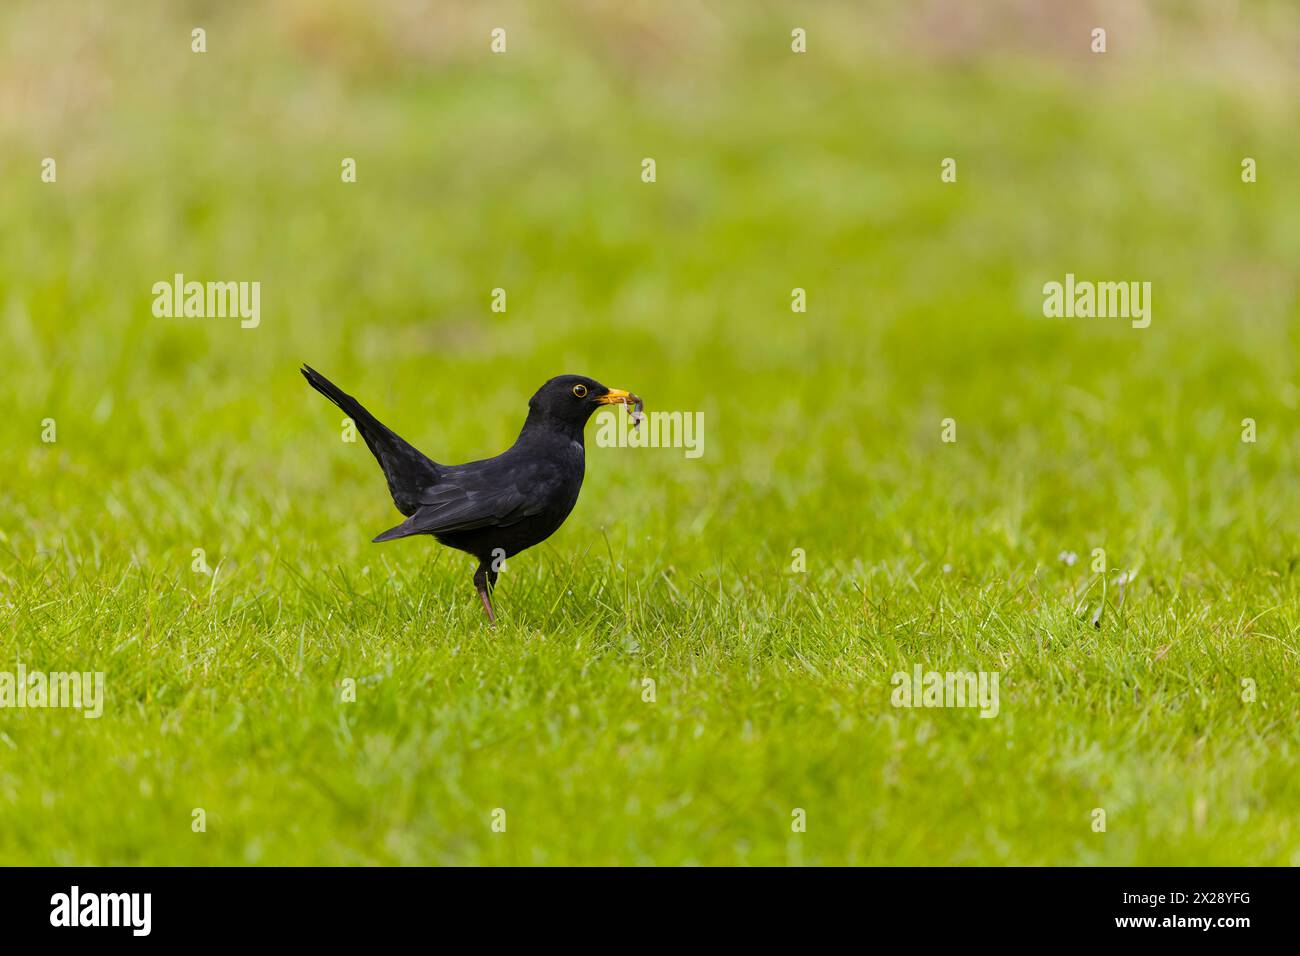 Common blackbird Turdus merula, adult male standing on grass with food for chicks in beak, Suffolk, England, April Stock Photo